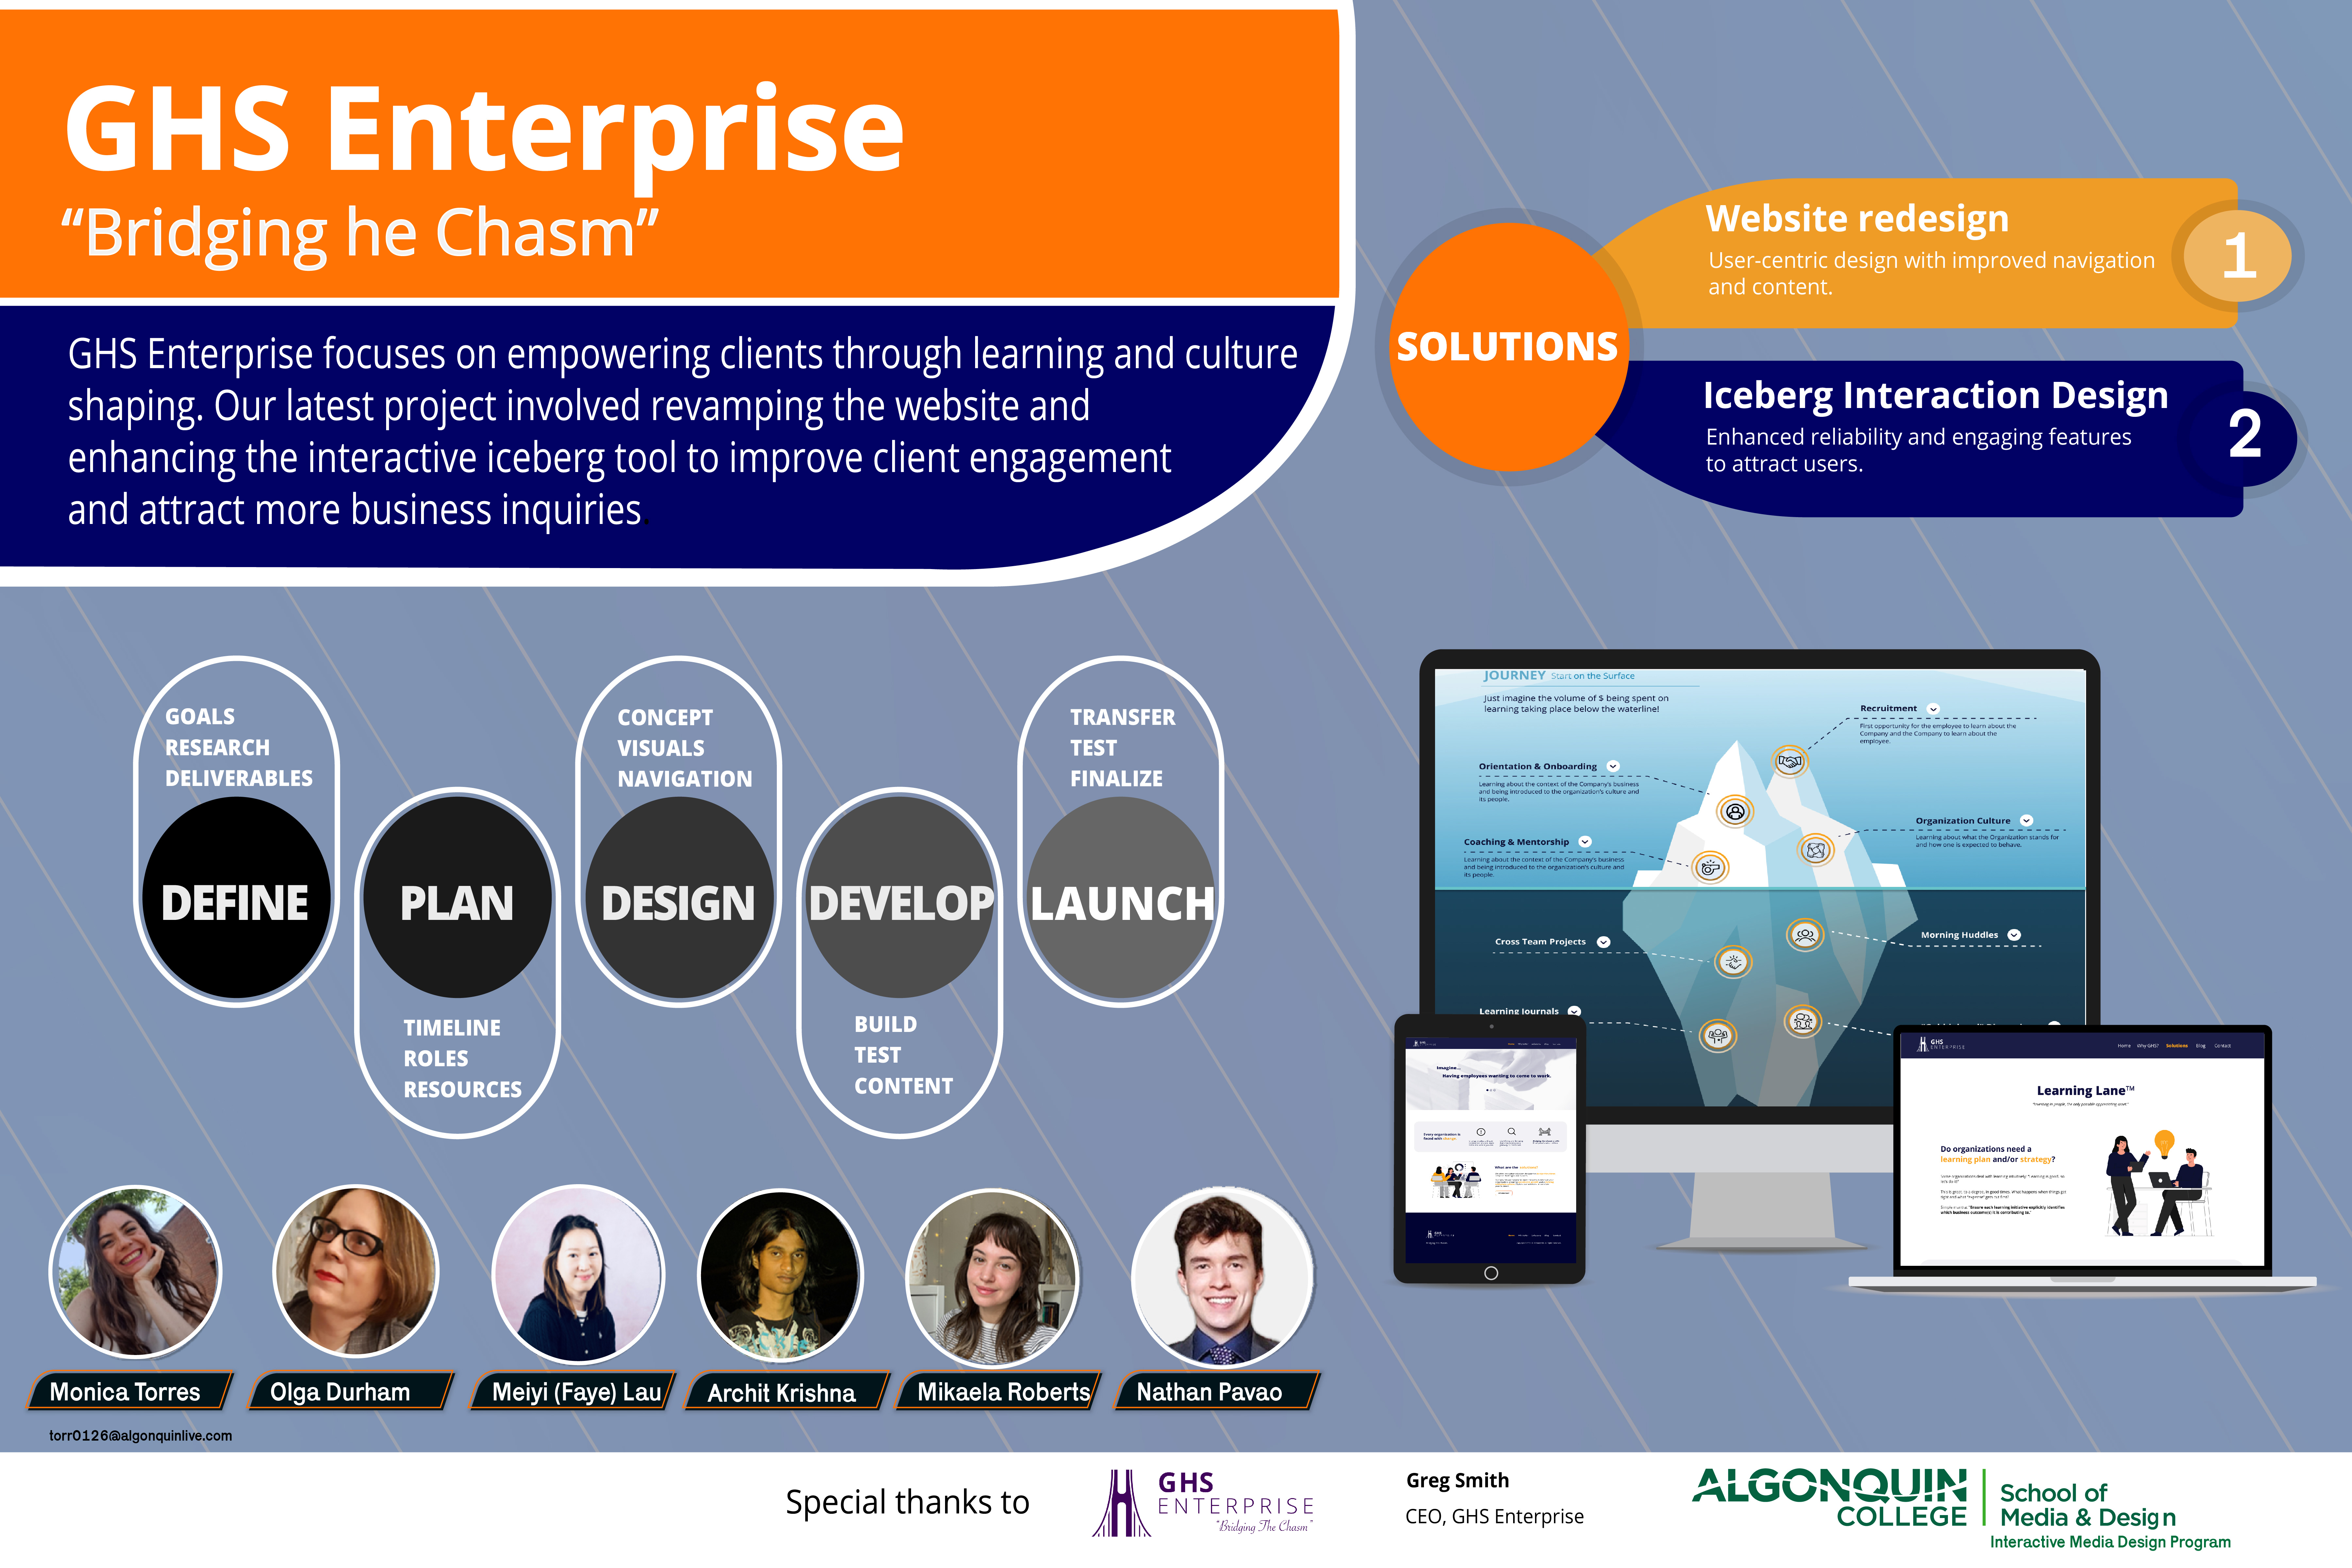 Display poster, GHS Enterprise company focuses on empowering customers through learning and shaping culture, website redesign project aims to ensure the new website meets the needs of its users and al at the same time effectively convey the mission and services of GHS Enterprise. Six members of the